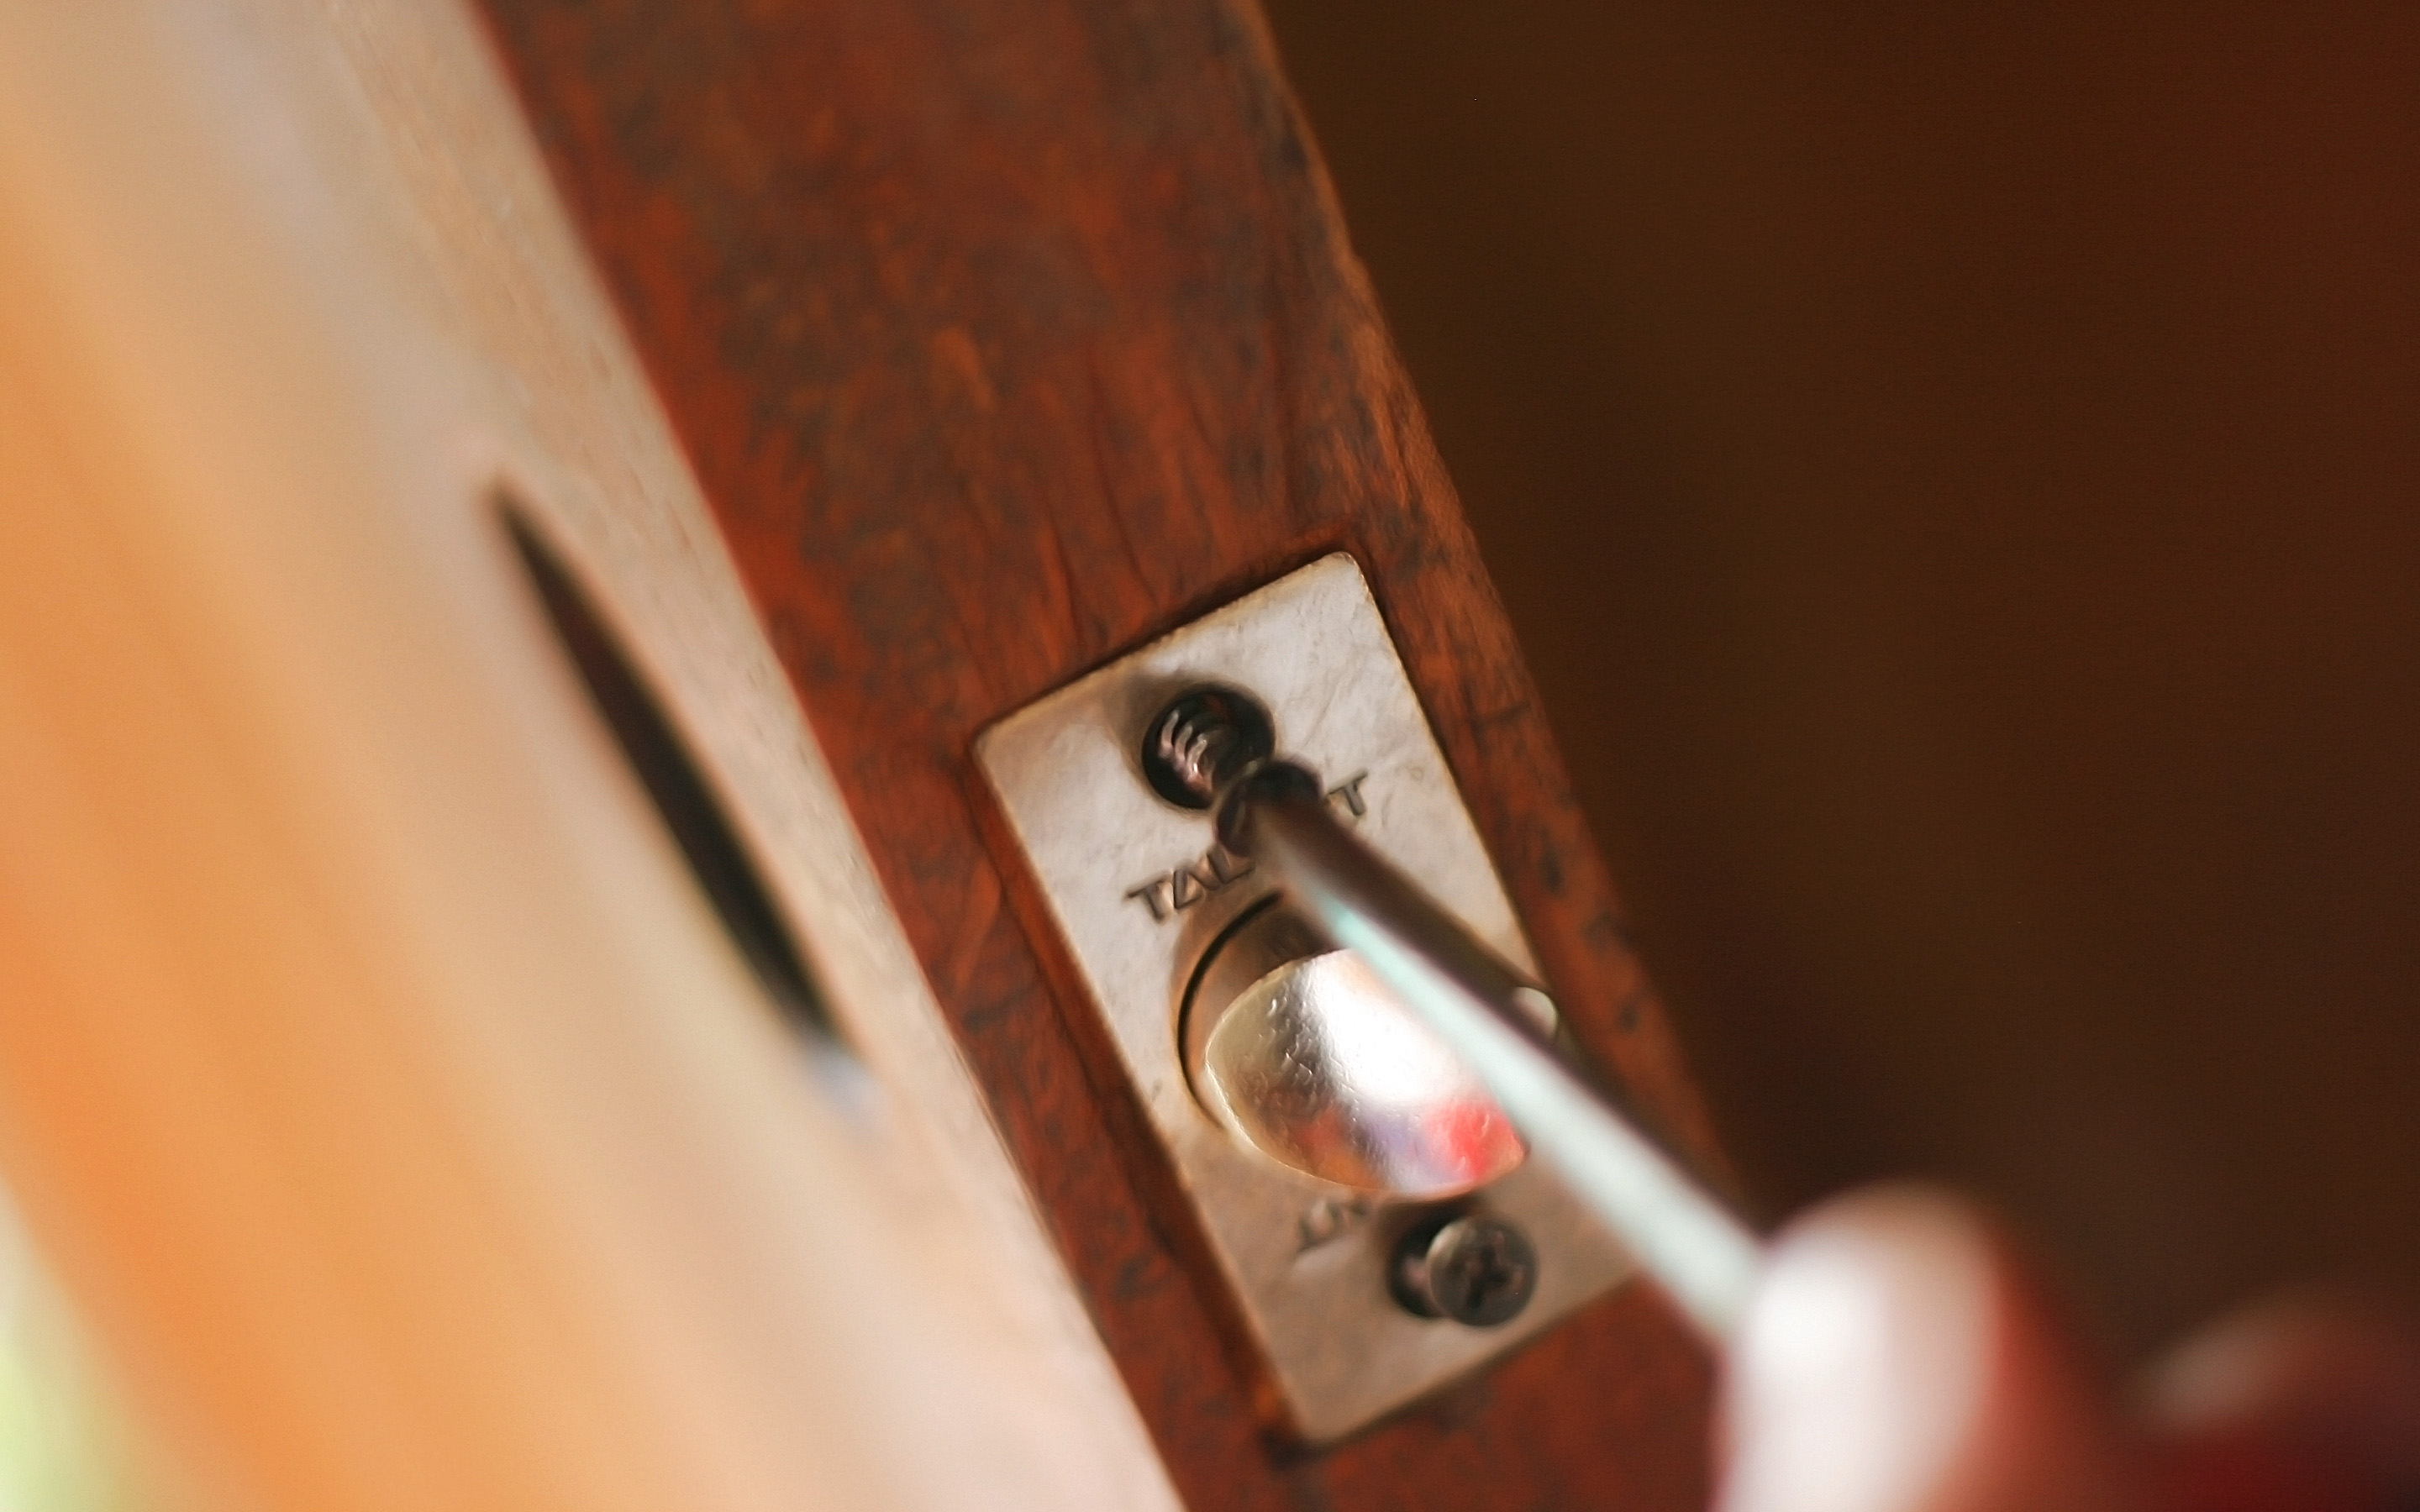 Install-a-Door-Latch-Attached-Mortise-Plate-Step-6.jpg (2880×1800)